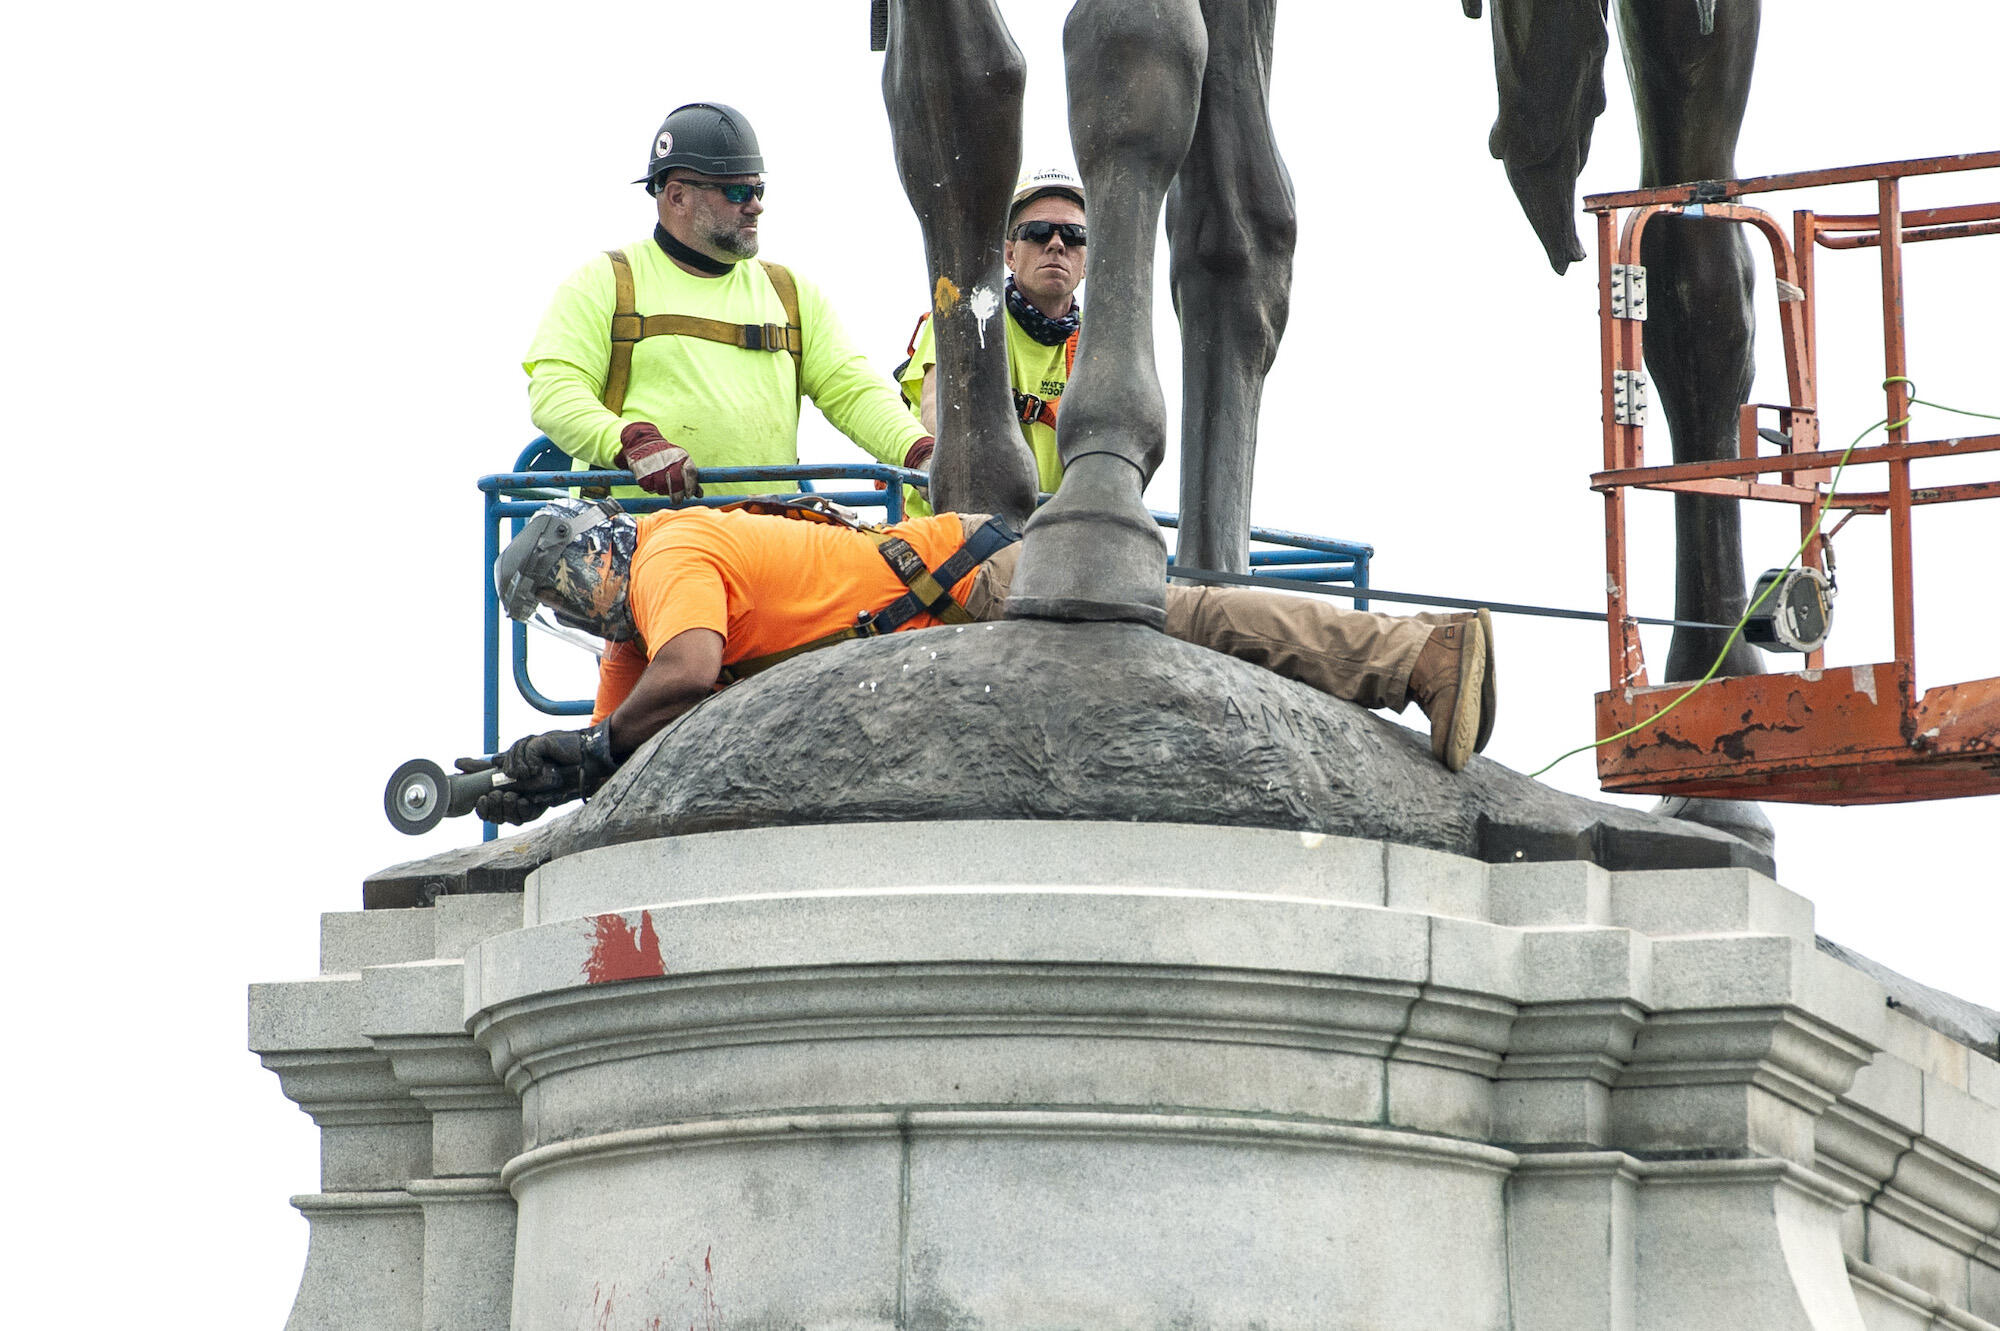 Workers begin removing the Robert E. Lee statue from its plinth